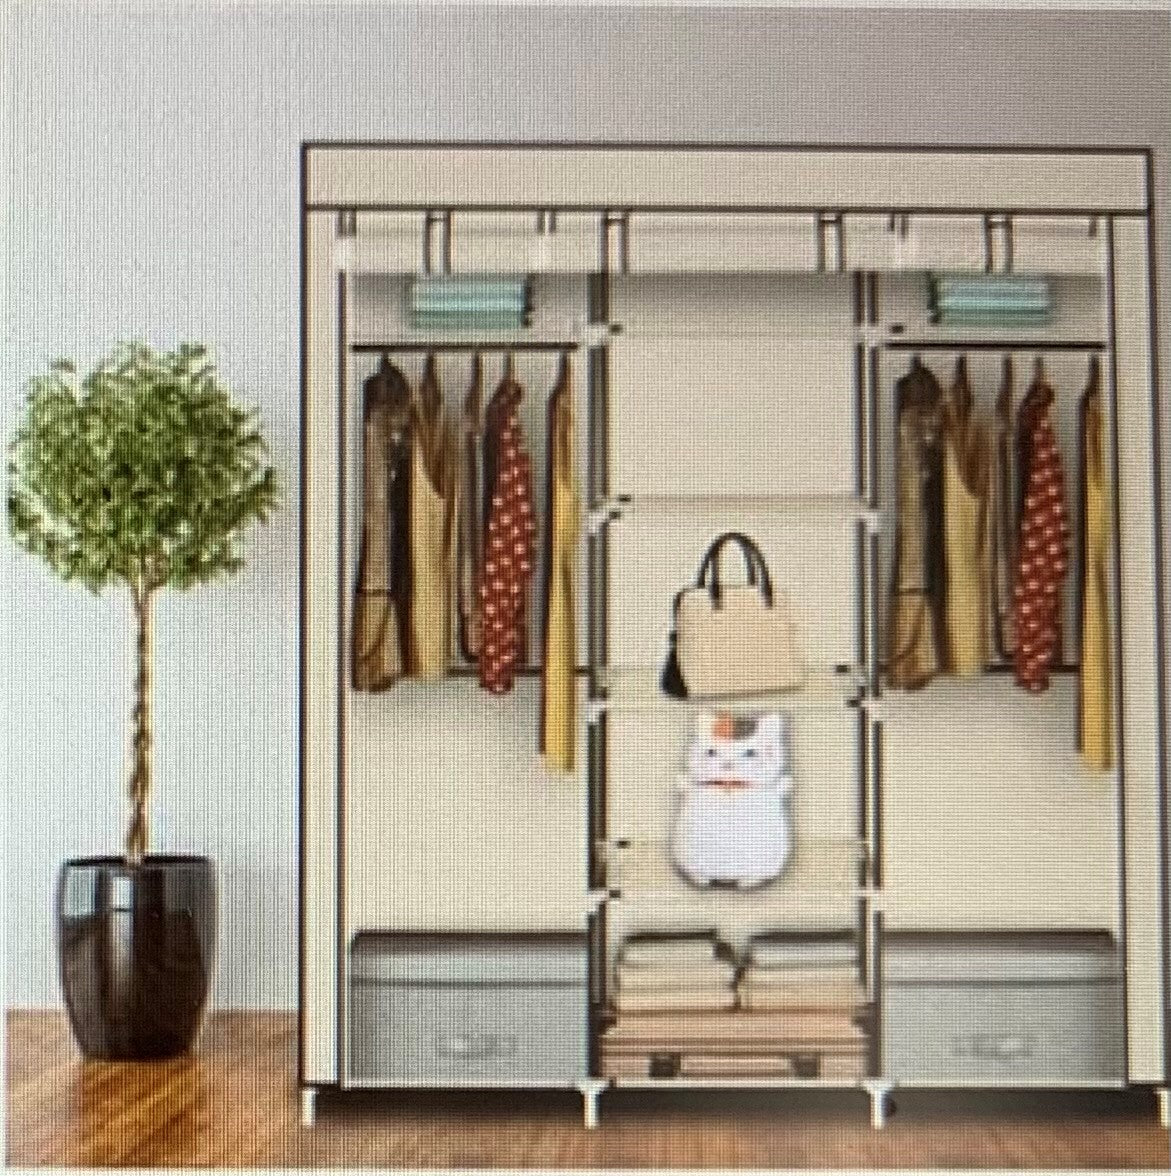 Portable Clothes Closet/ Non-Woven Fabric Wardrobe/ Sturdy & Durable/ Water-proof/ Double Rod Storage Organizer/ 4 Colors